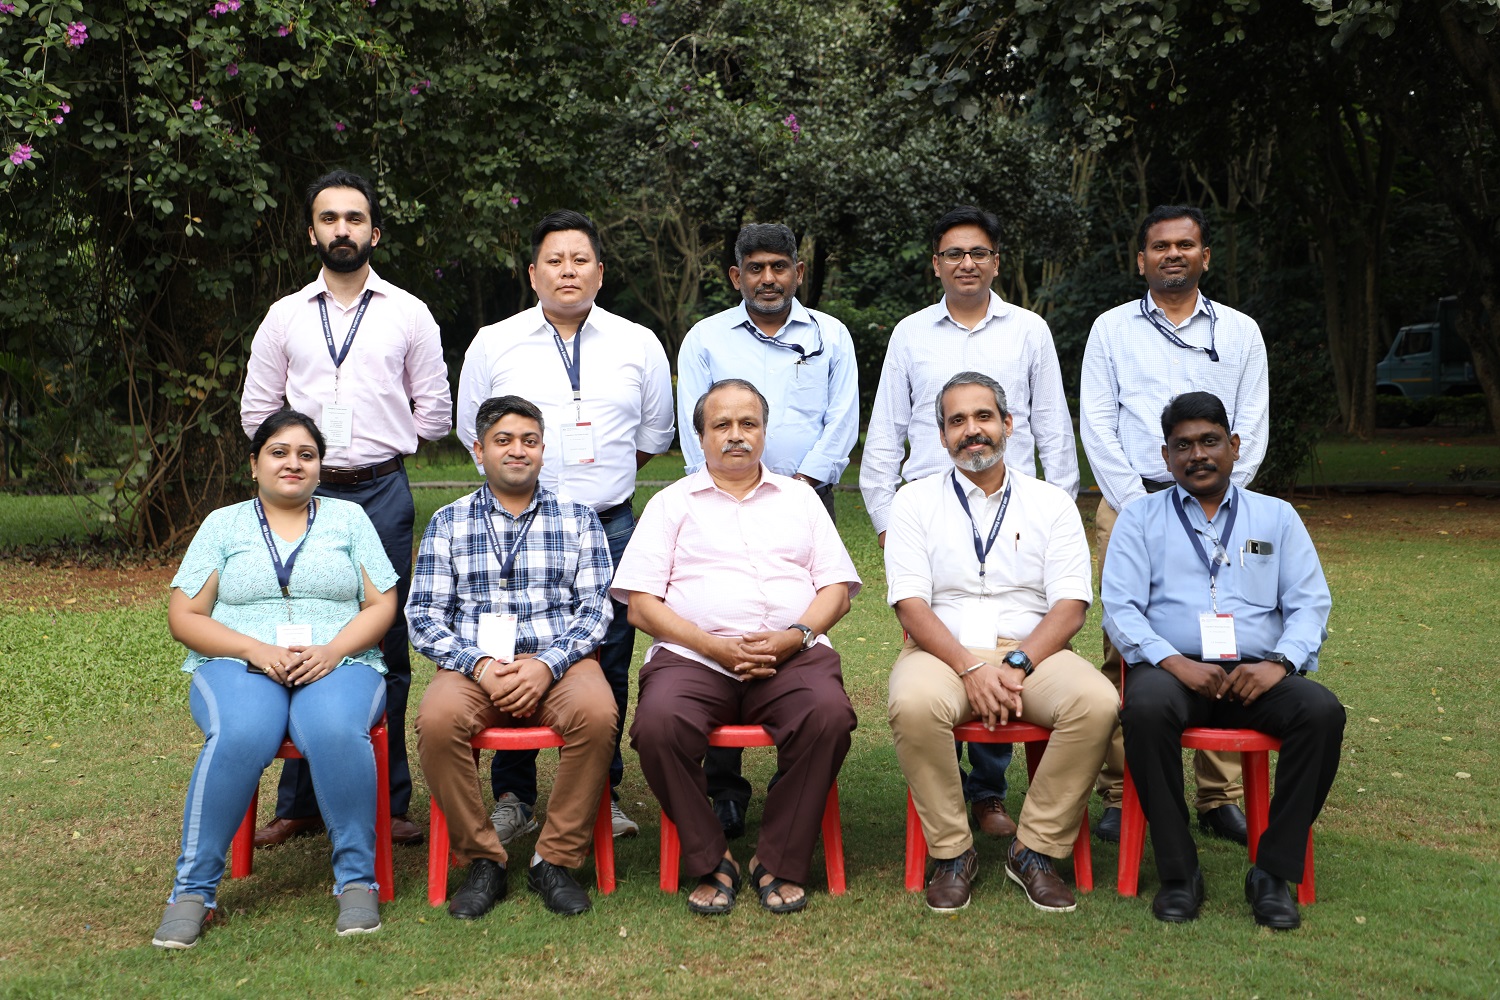 Participants of the Programme, Competitive Marketing Strategy on November 3, 2022. Programme Director Prof. Nagasimha Balakrishna Kanagal is seen with them.